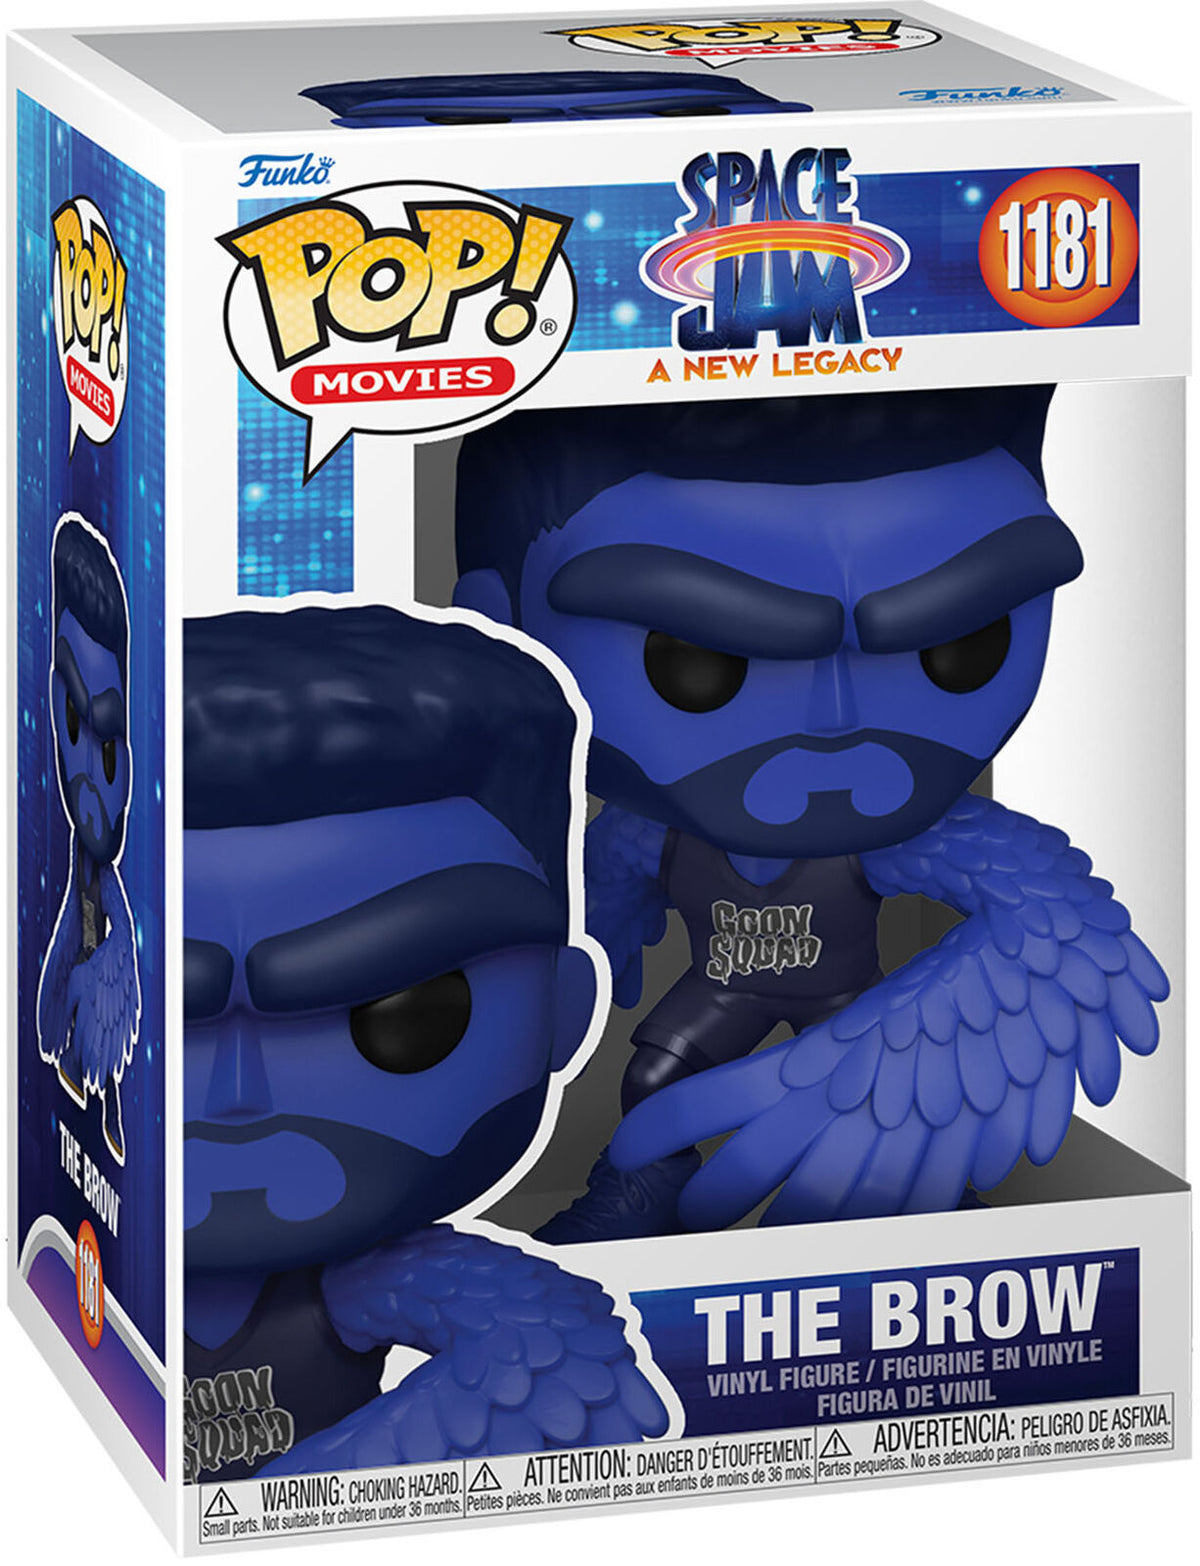 The Brow Funko Pop Space Jam 2 A New Legacy 1181 W/ Protector